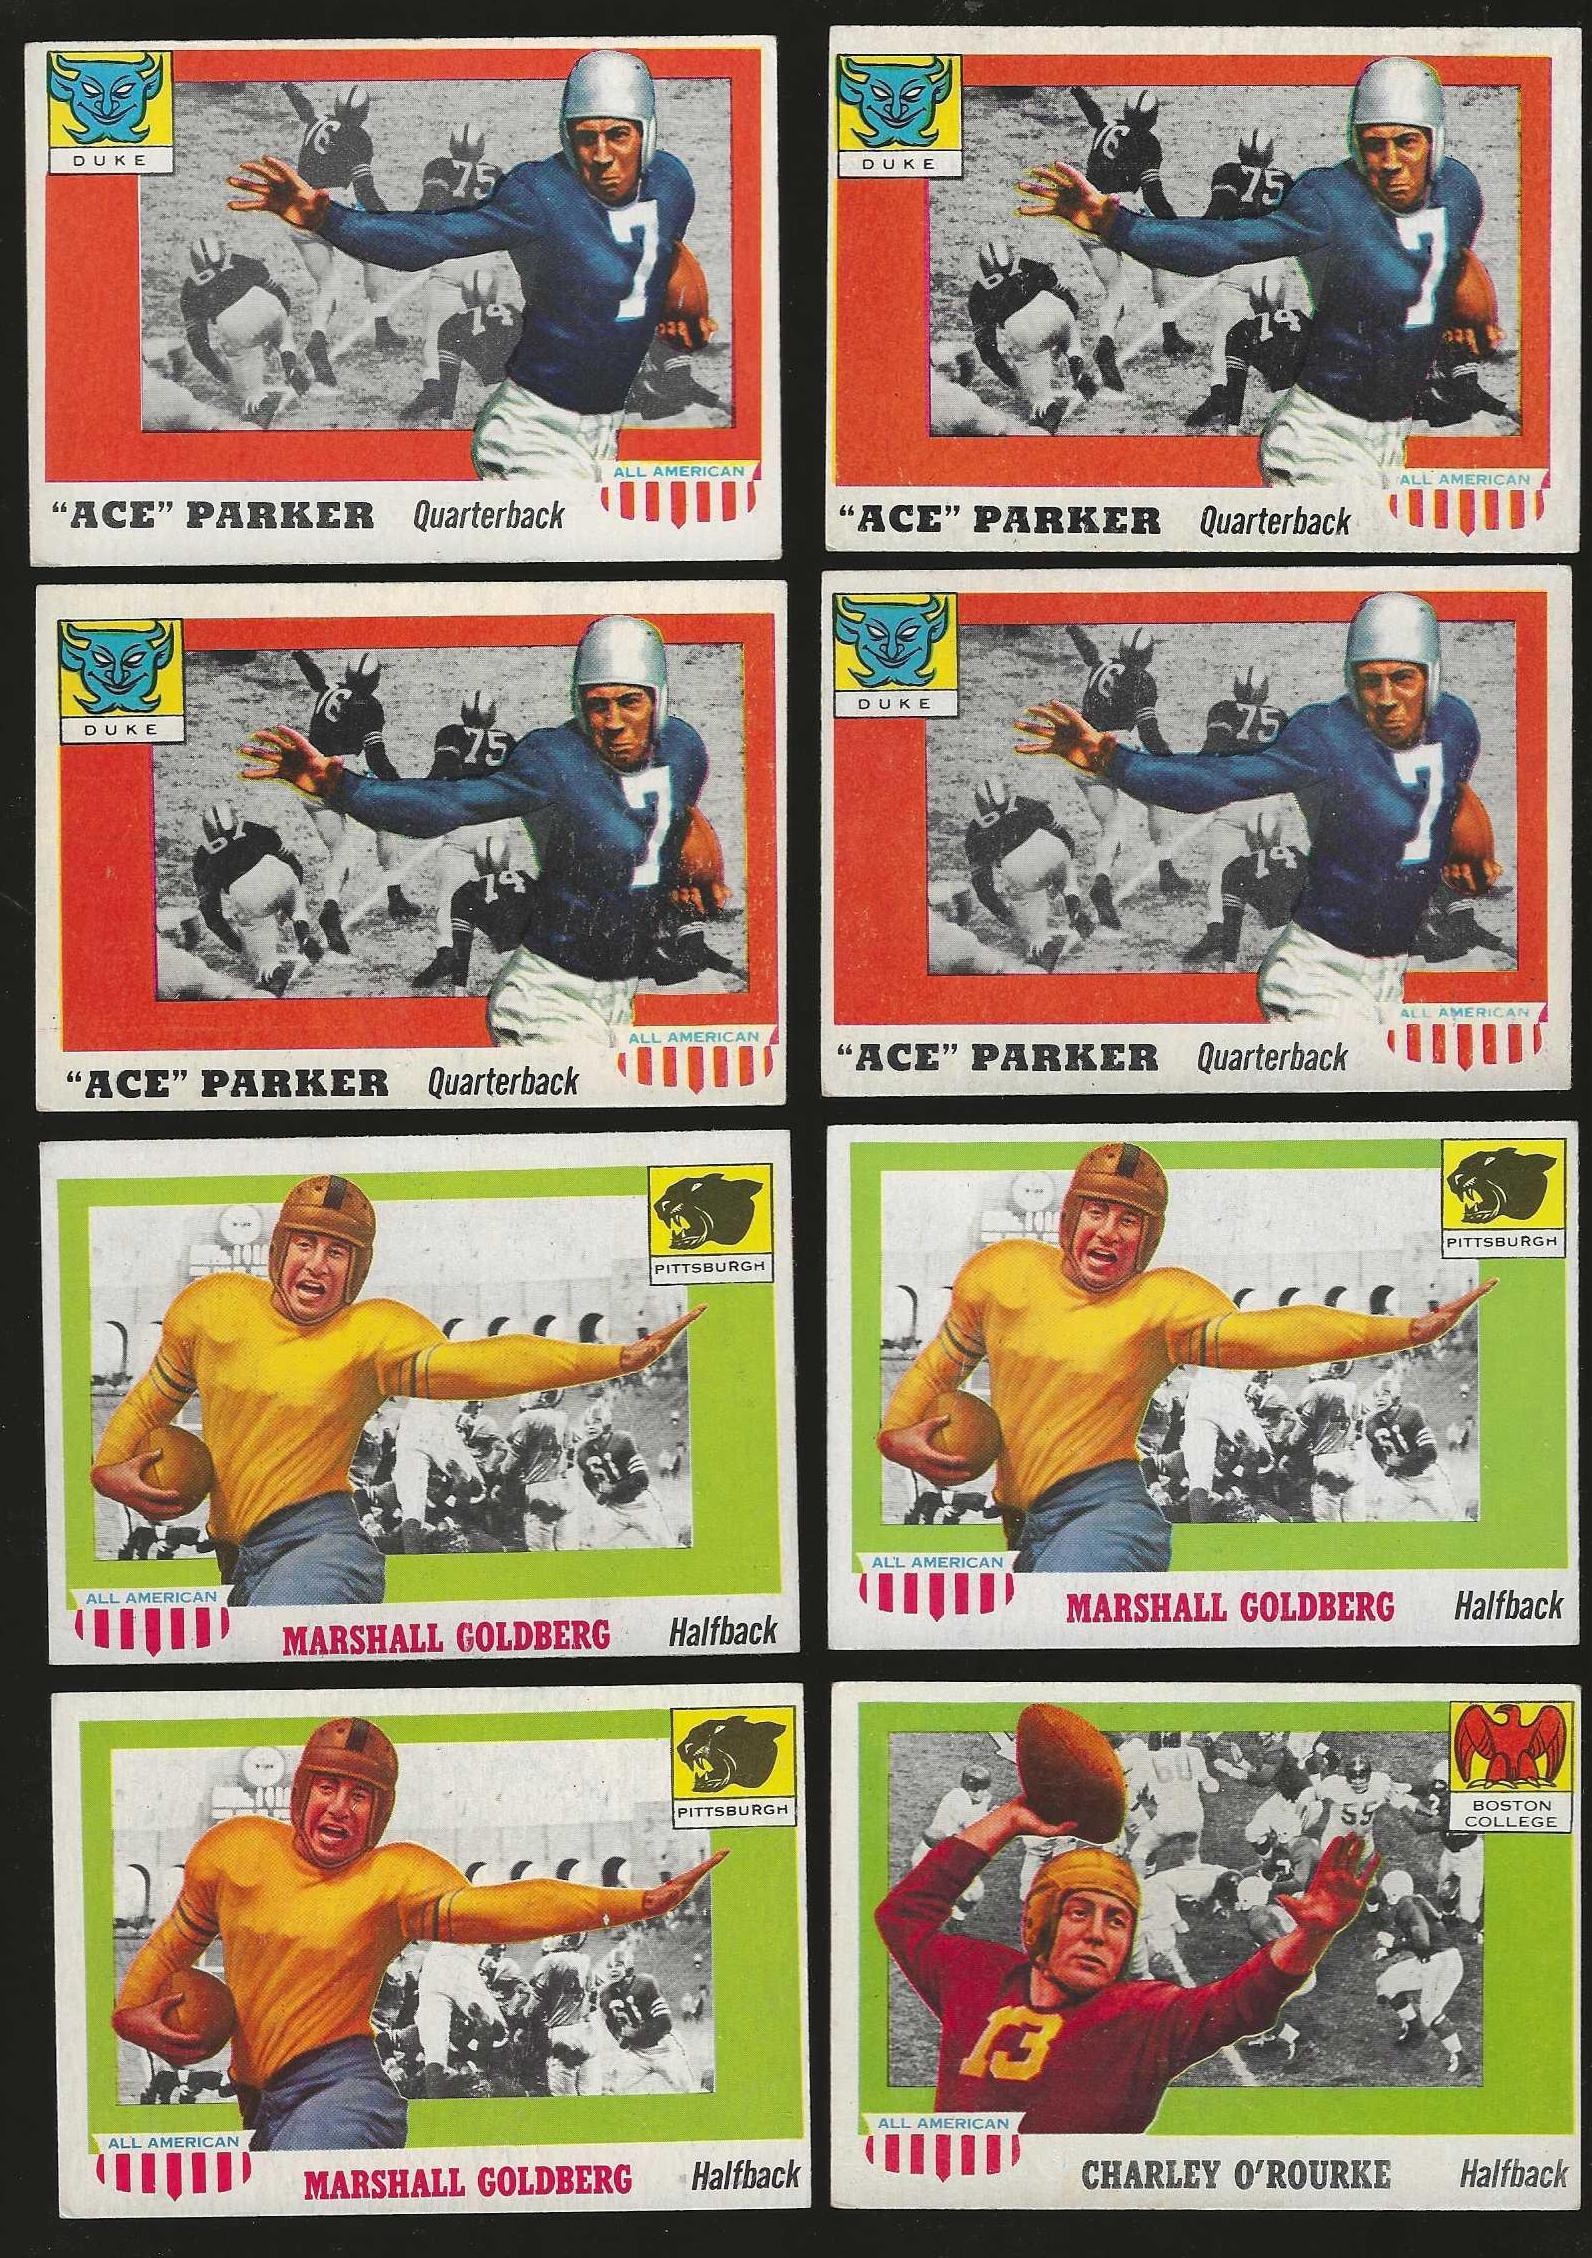 1955 Topps ALL-AMERICAN FB # 84 Ace Parker ROOKIE SHORT PRINT (Duke) Football cards value